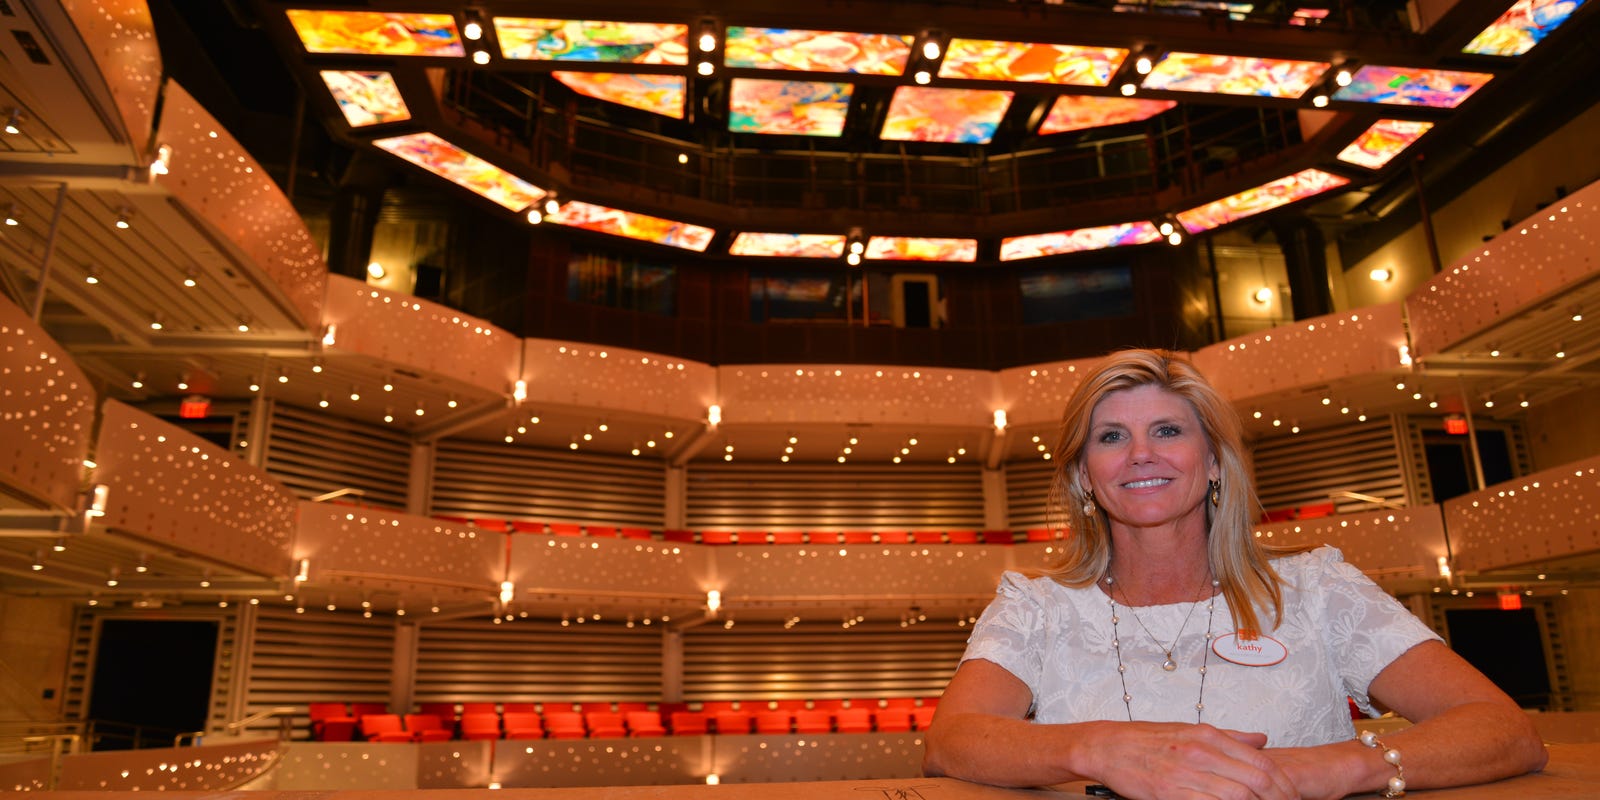 Dr Phillips Center For The Performing Arts Welcomes All